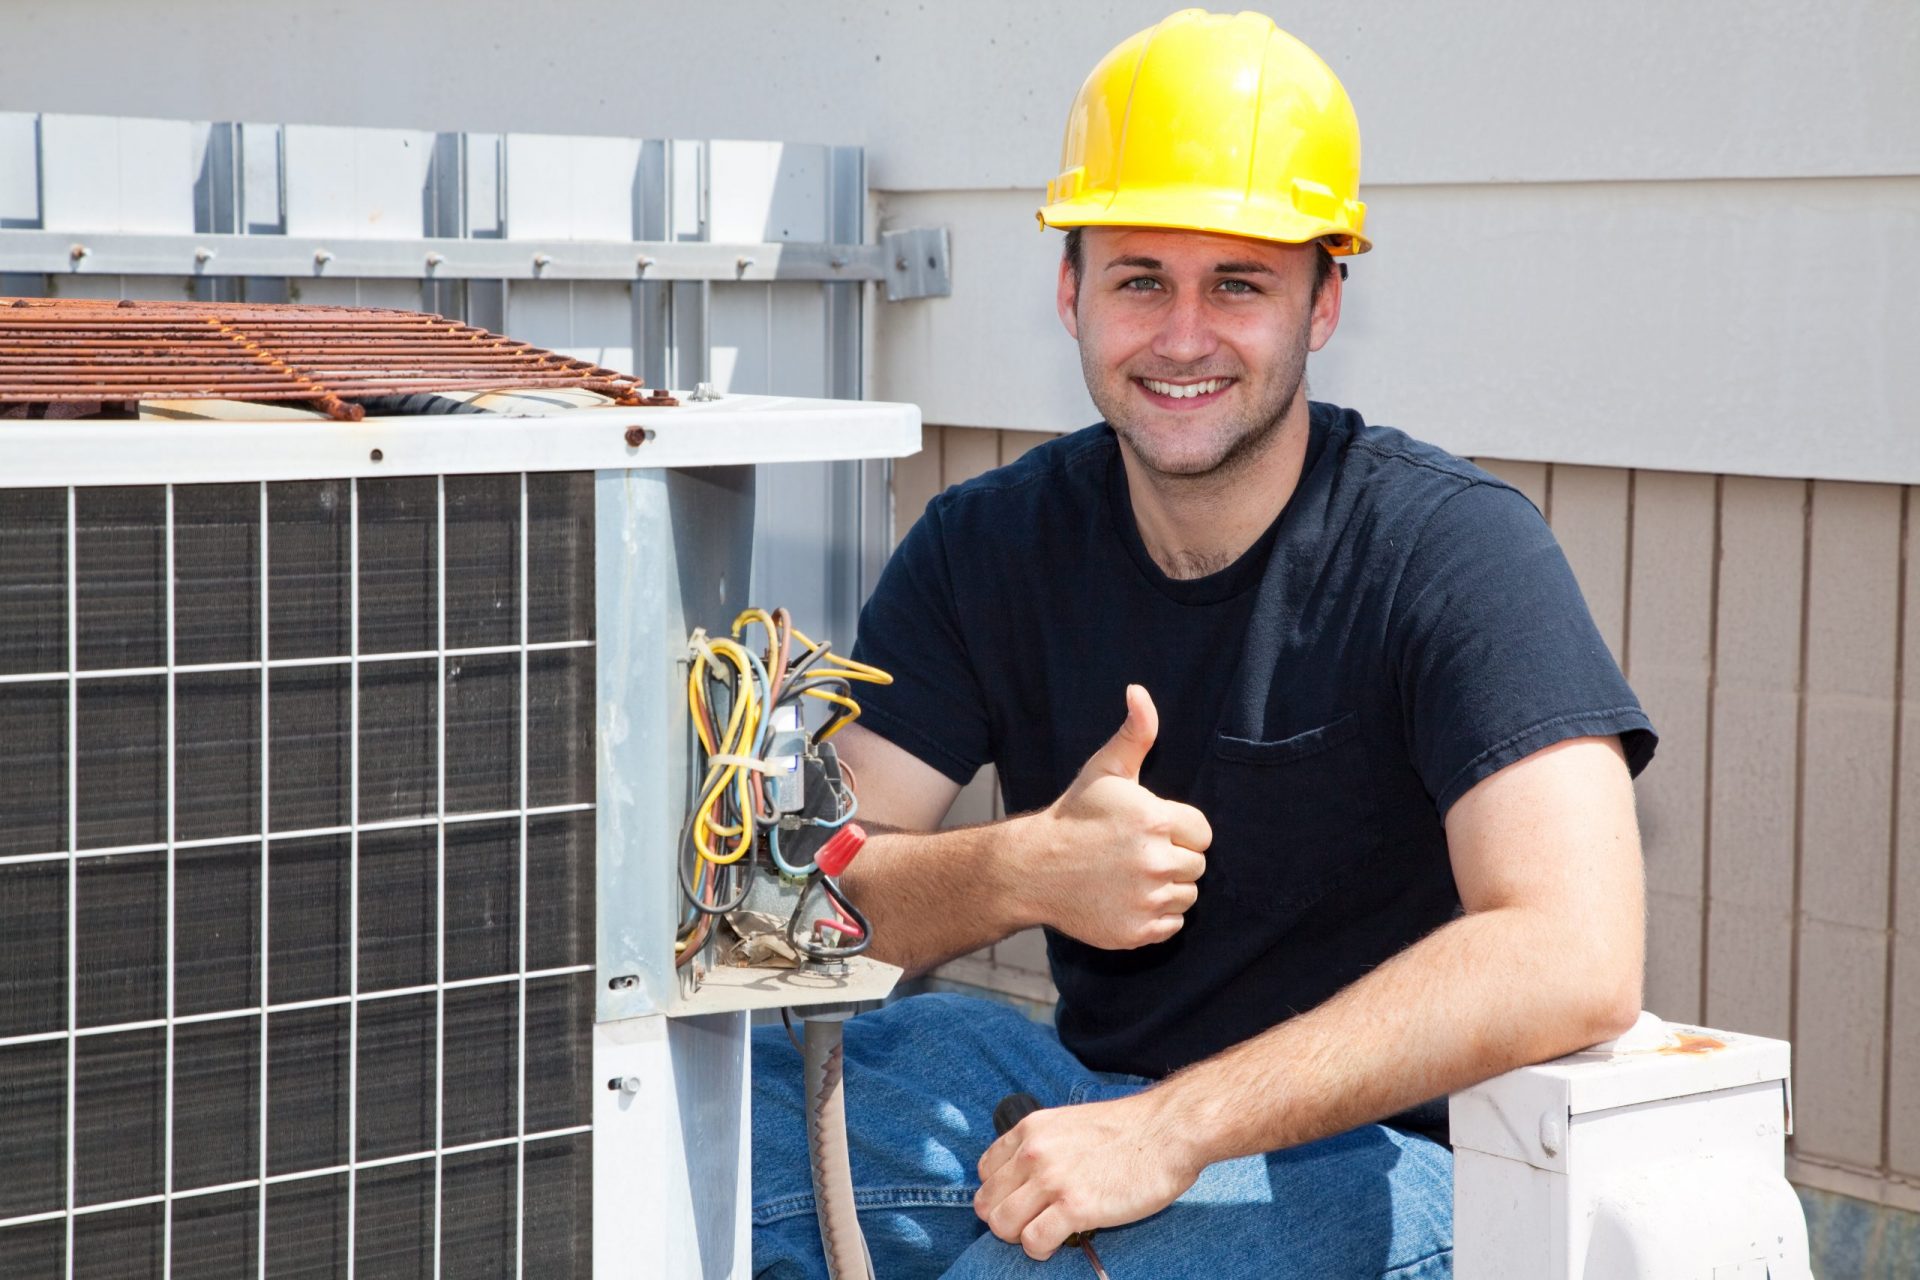 Furnace - Heating, ventilation, and air conditioning